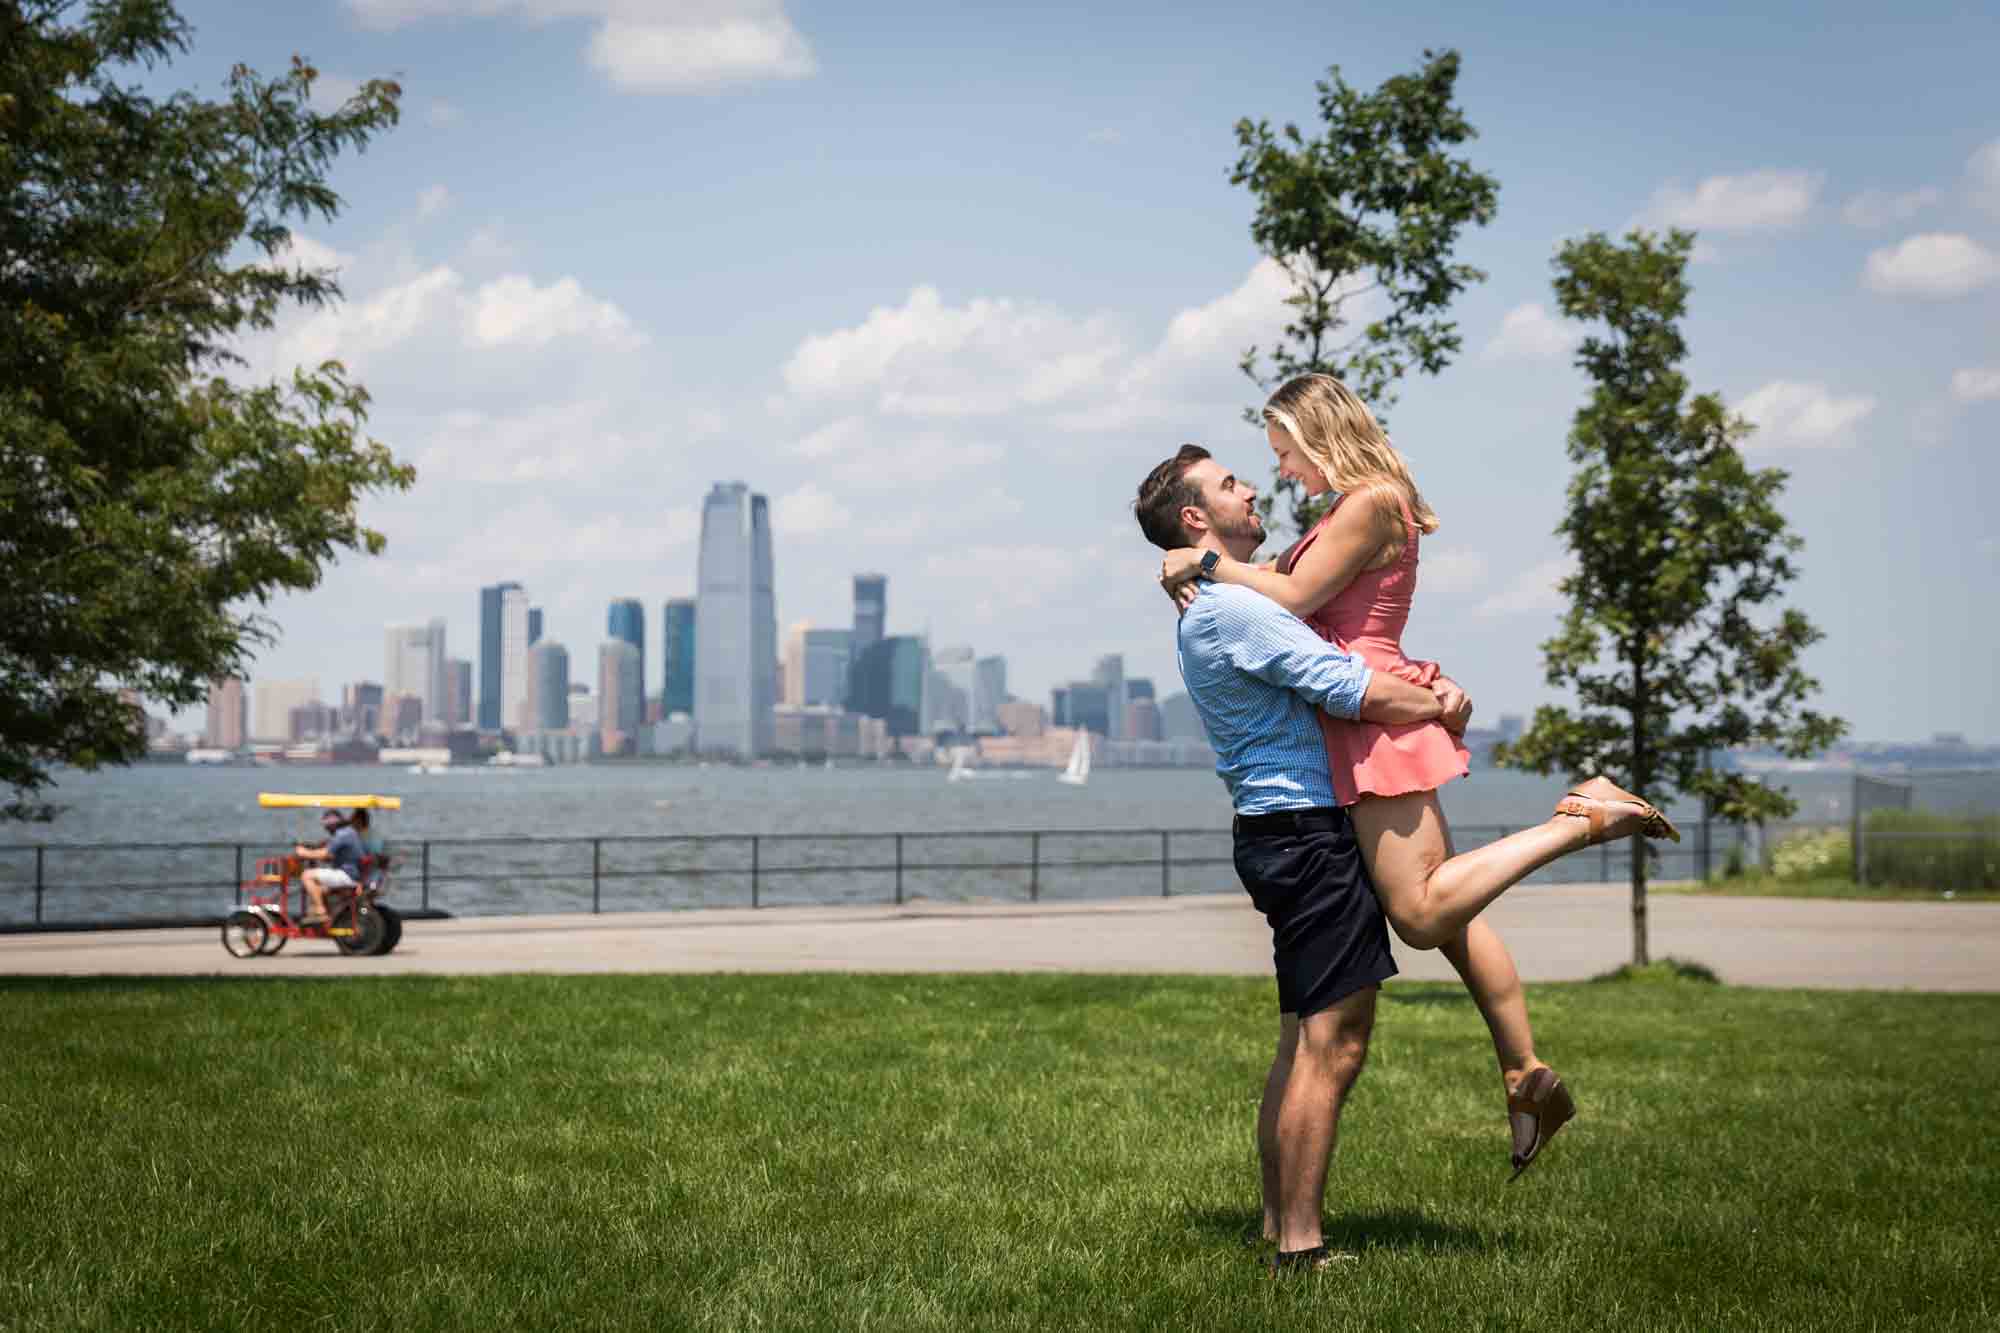 Man lifting woman up in the air with NYC skyline in the background